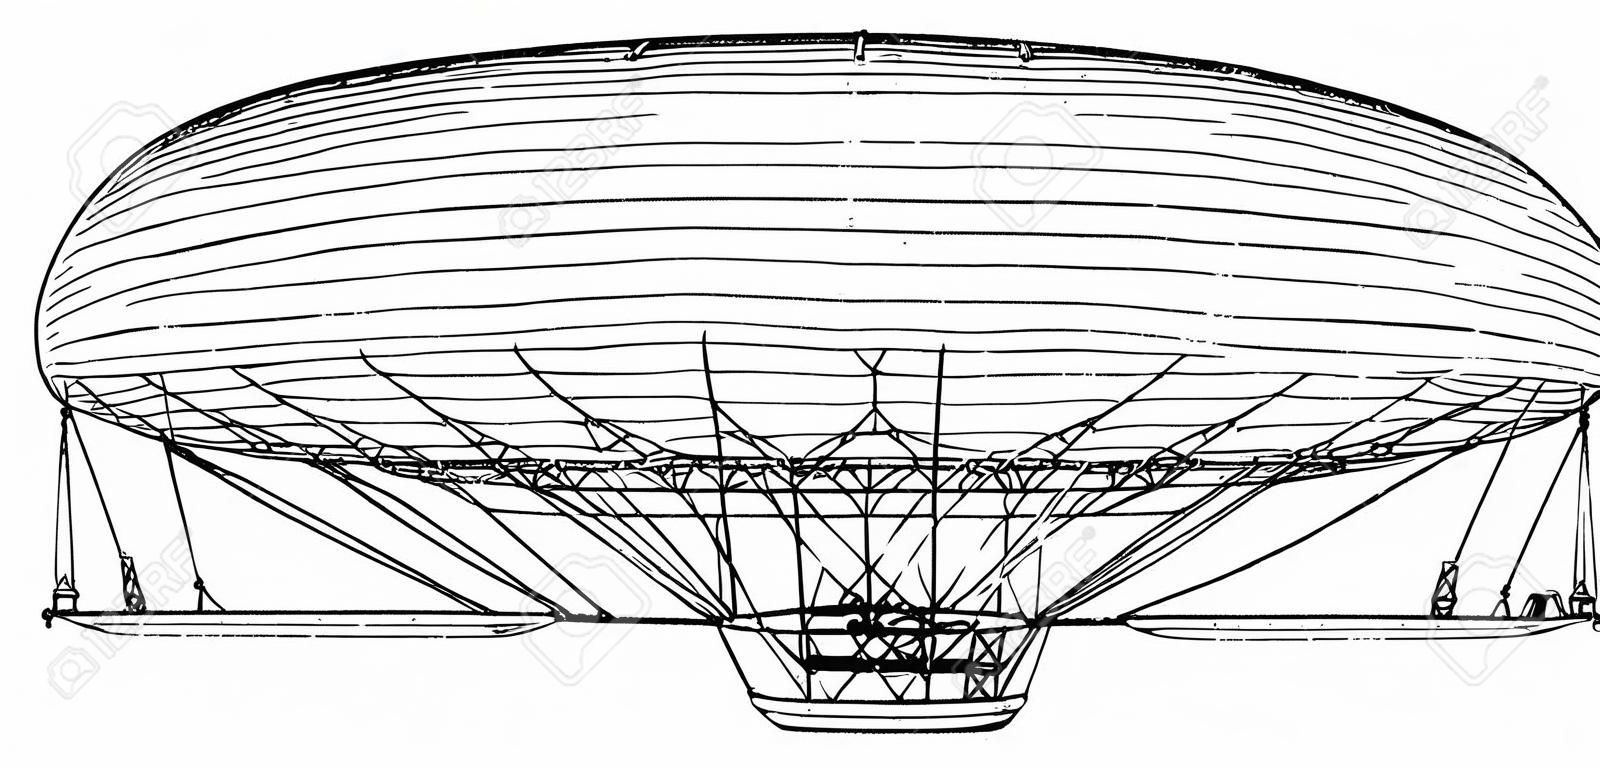 Dirigible Balloon successfully equipped with a powerful oil engine, vintage line drawing or engraving illustration.